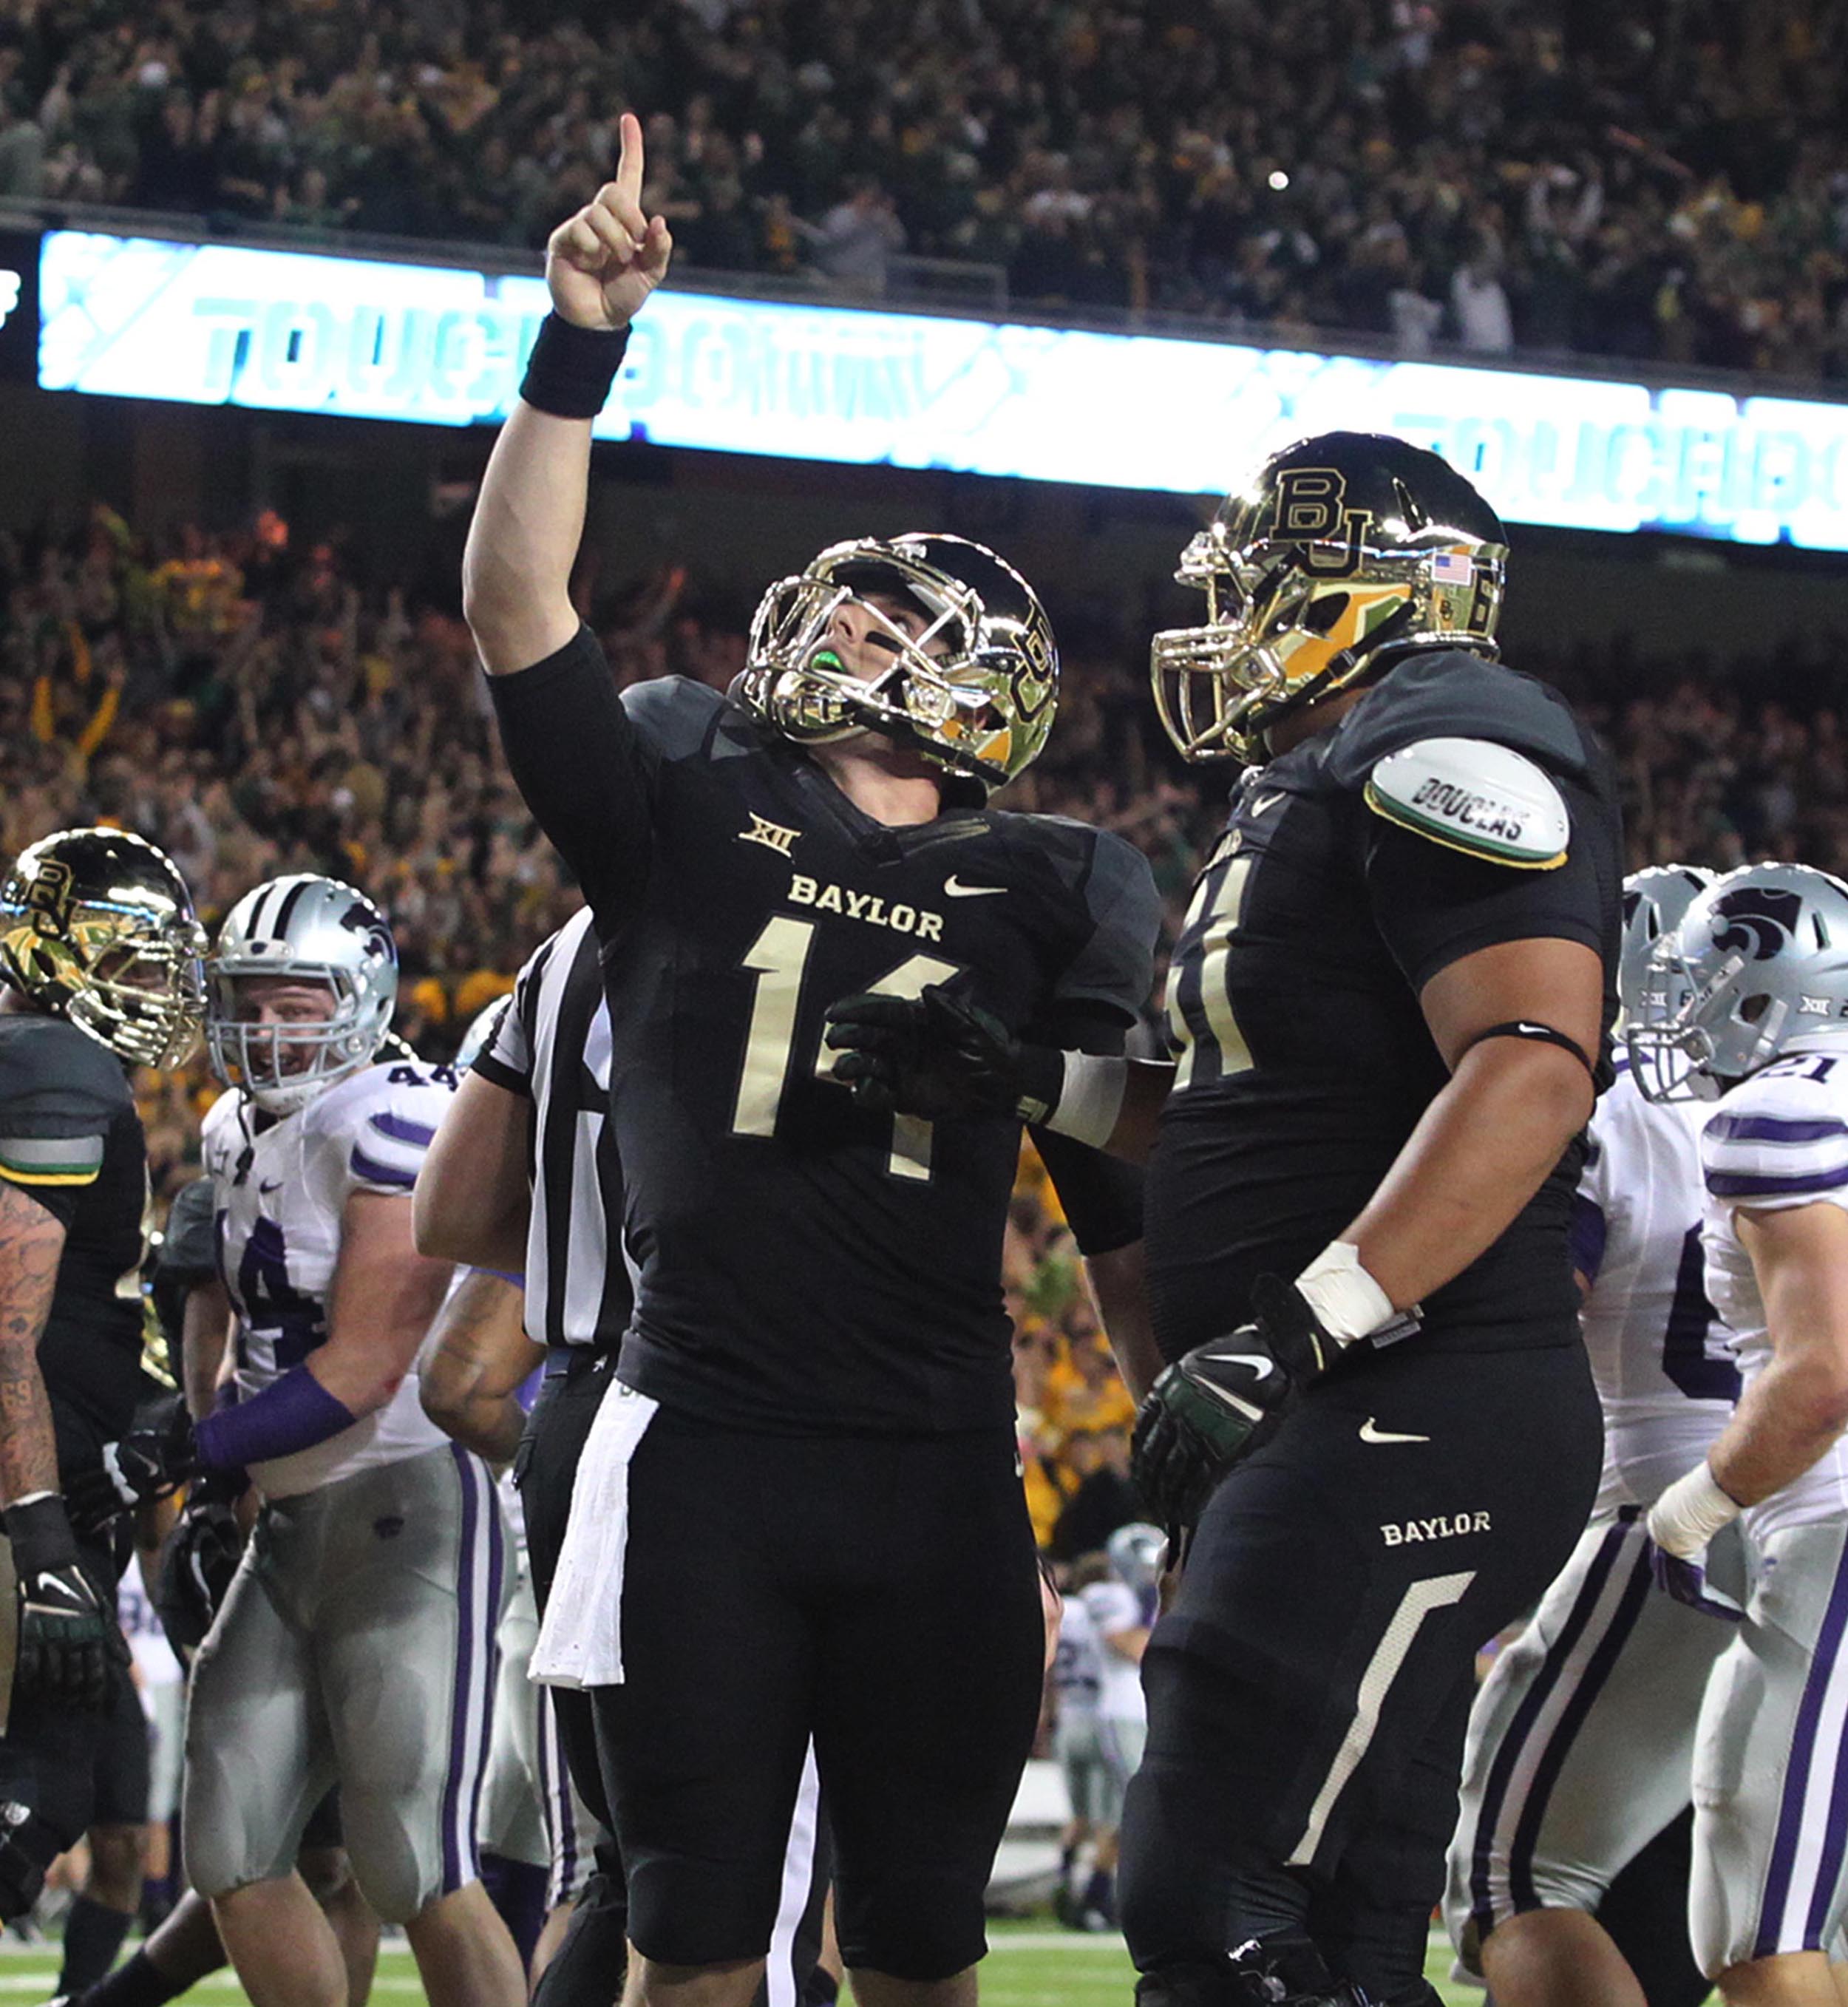 Baylor quarterback Bryce Petty (14) points upward with teammate offensive linesman Jarell Broxton (61), right, following his touchdown over Kansas State in the first half of NCAA college football game, Saturday, Dec. 6, 2014, in Waco, Texas. (AP Photo/Waco Tribune Herald, Jerry Larson)